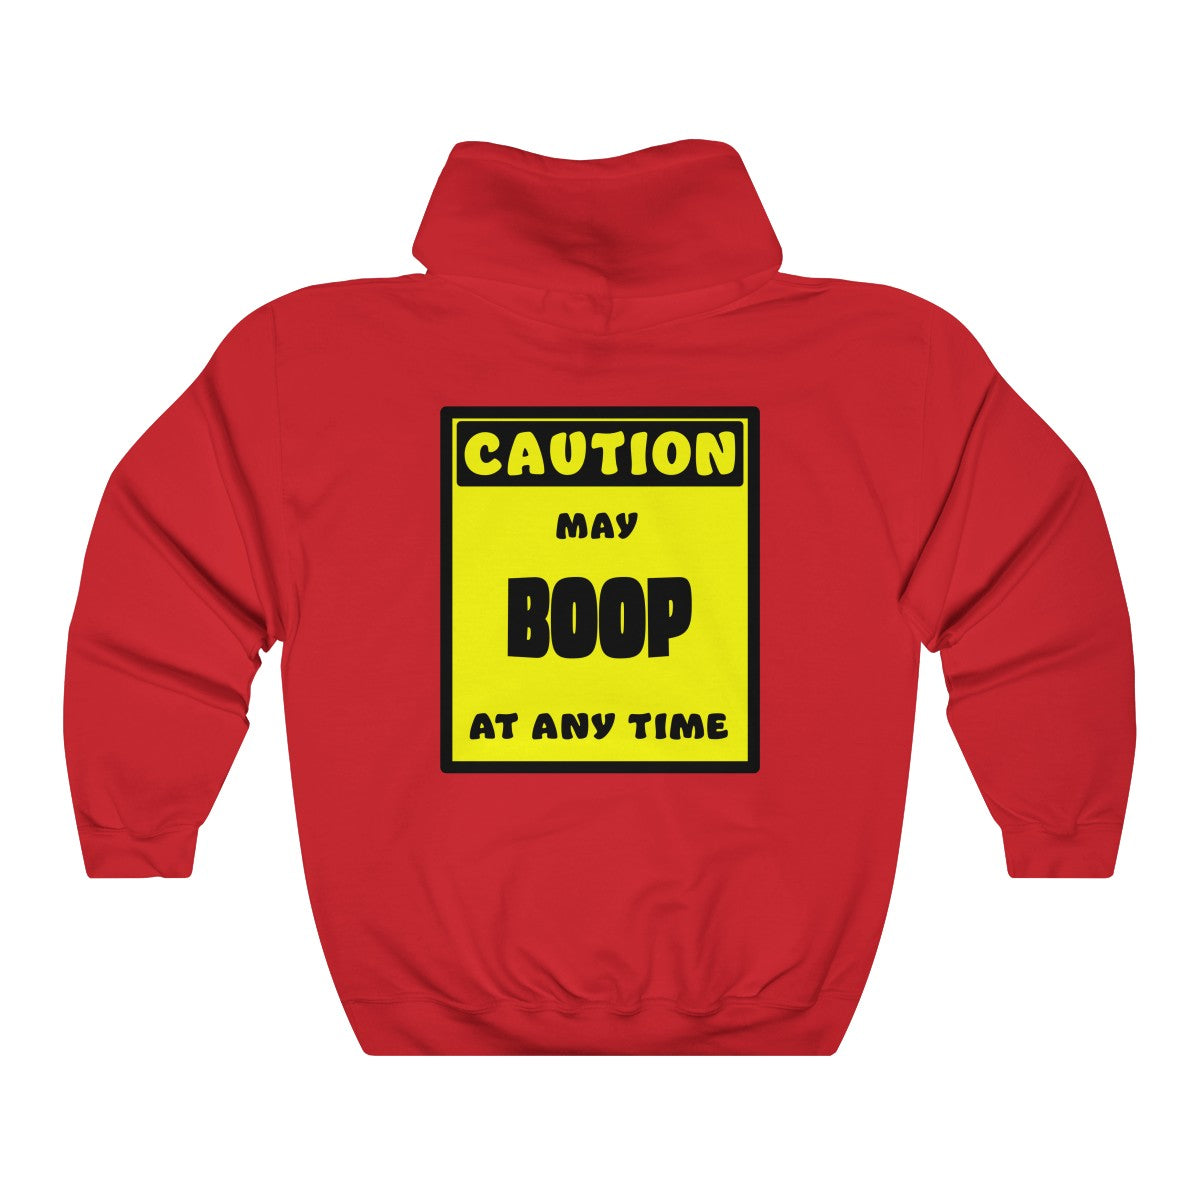 CAUTION! May BOOP at any time! - Hoodie Hoodie AFLT-Whootorca Red S 